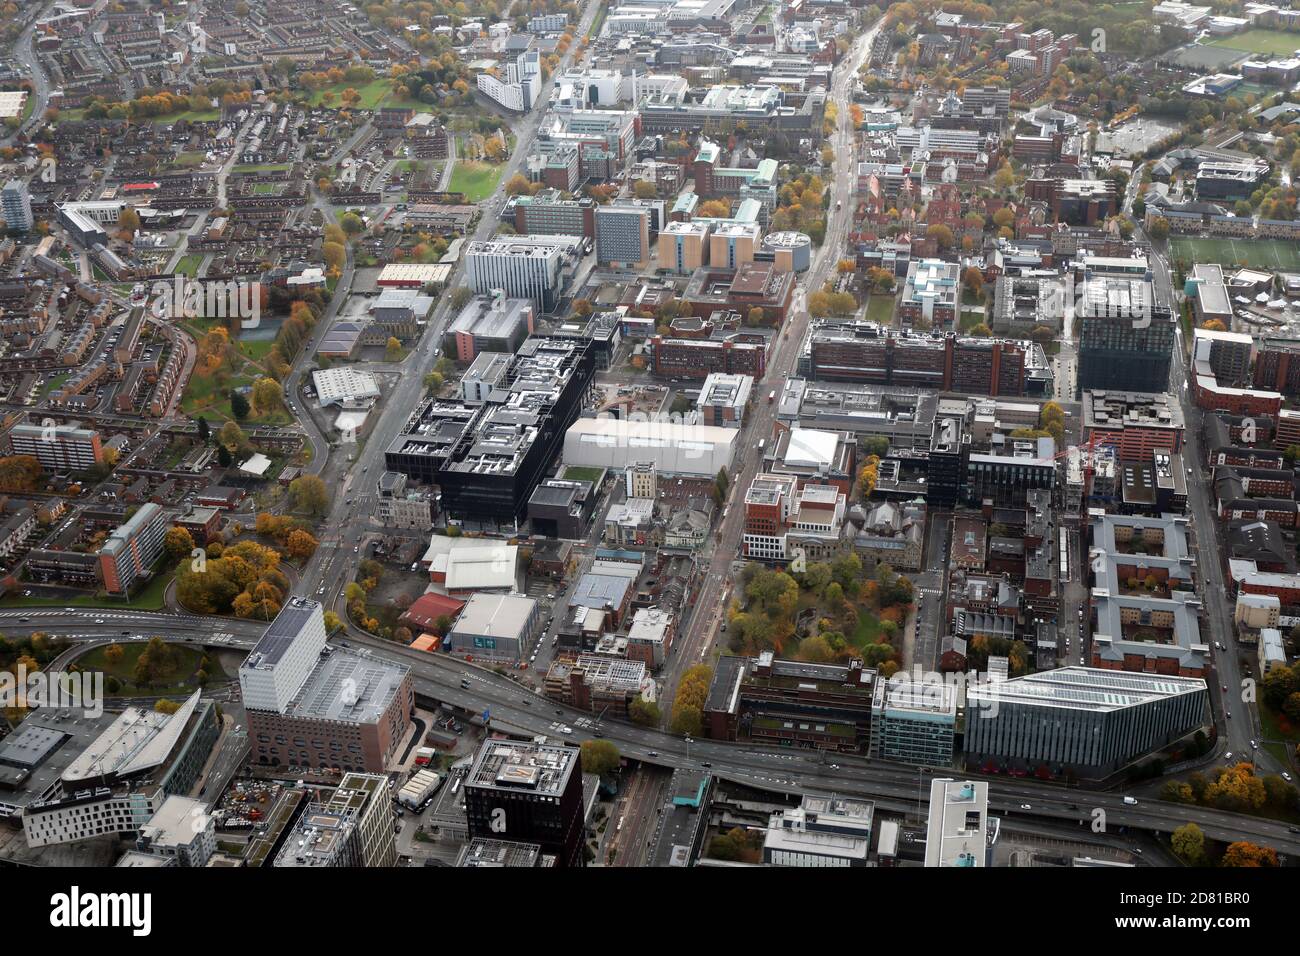 aerial view of The University of Manchester and Manchester Metropolitan University buildings and campus Stock Photo